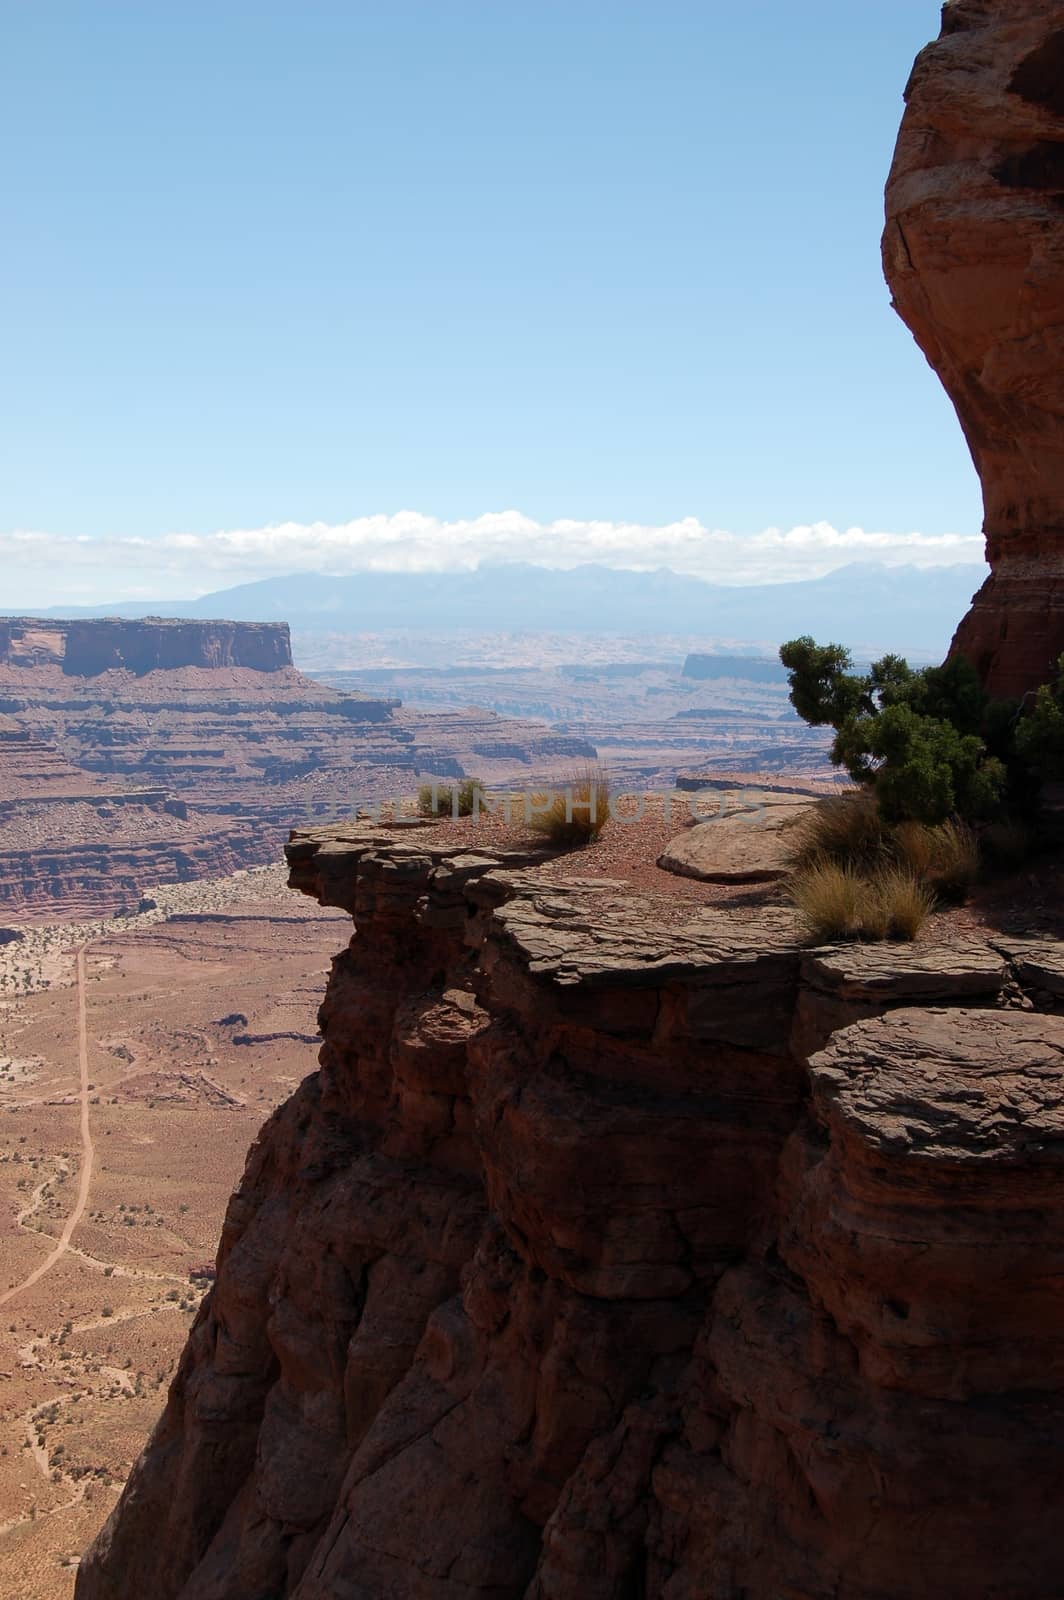 The Canyonland by welcomia